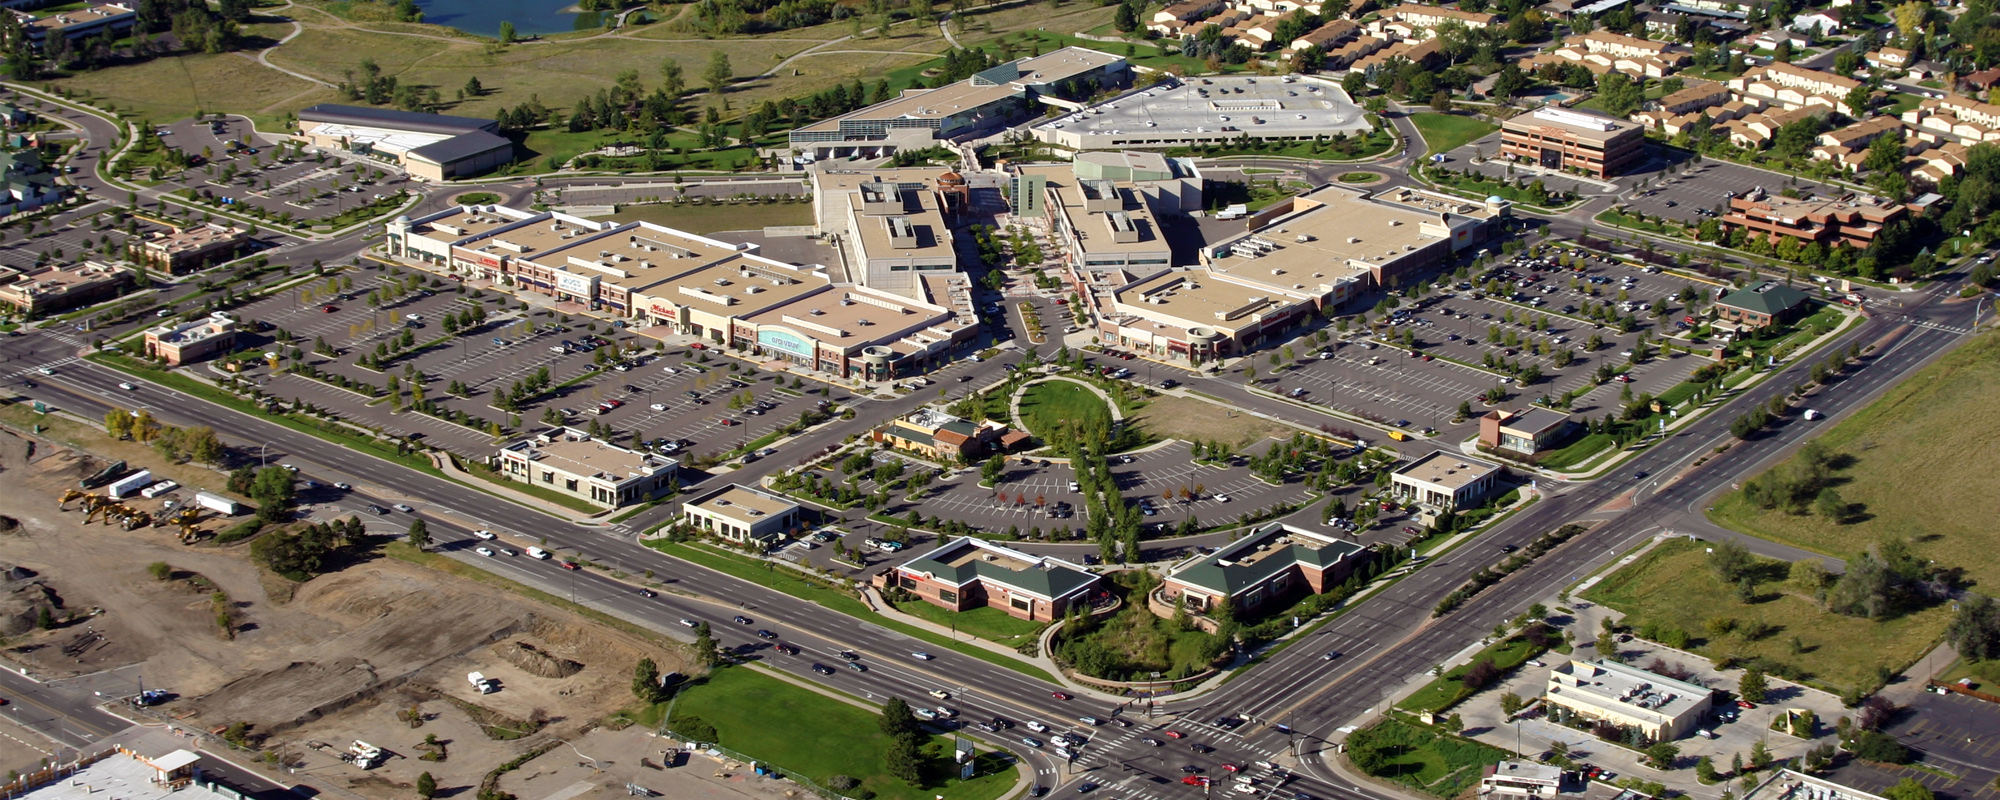 Lakewood City Commons Arial by Martin-Martin Consulting Engineers